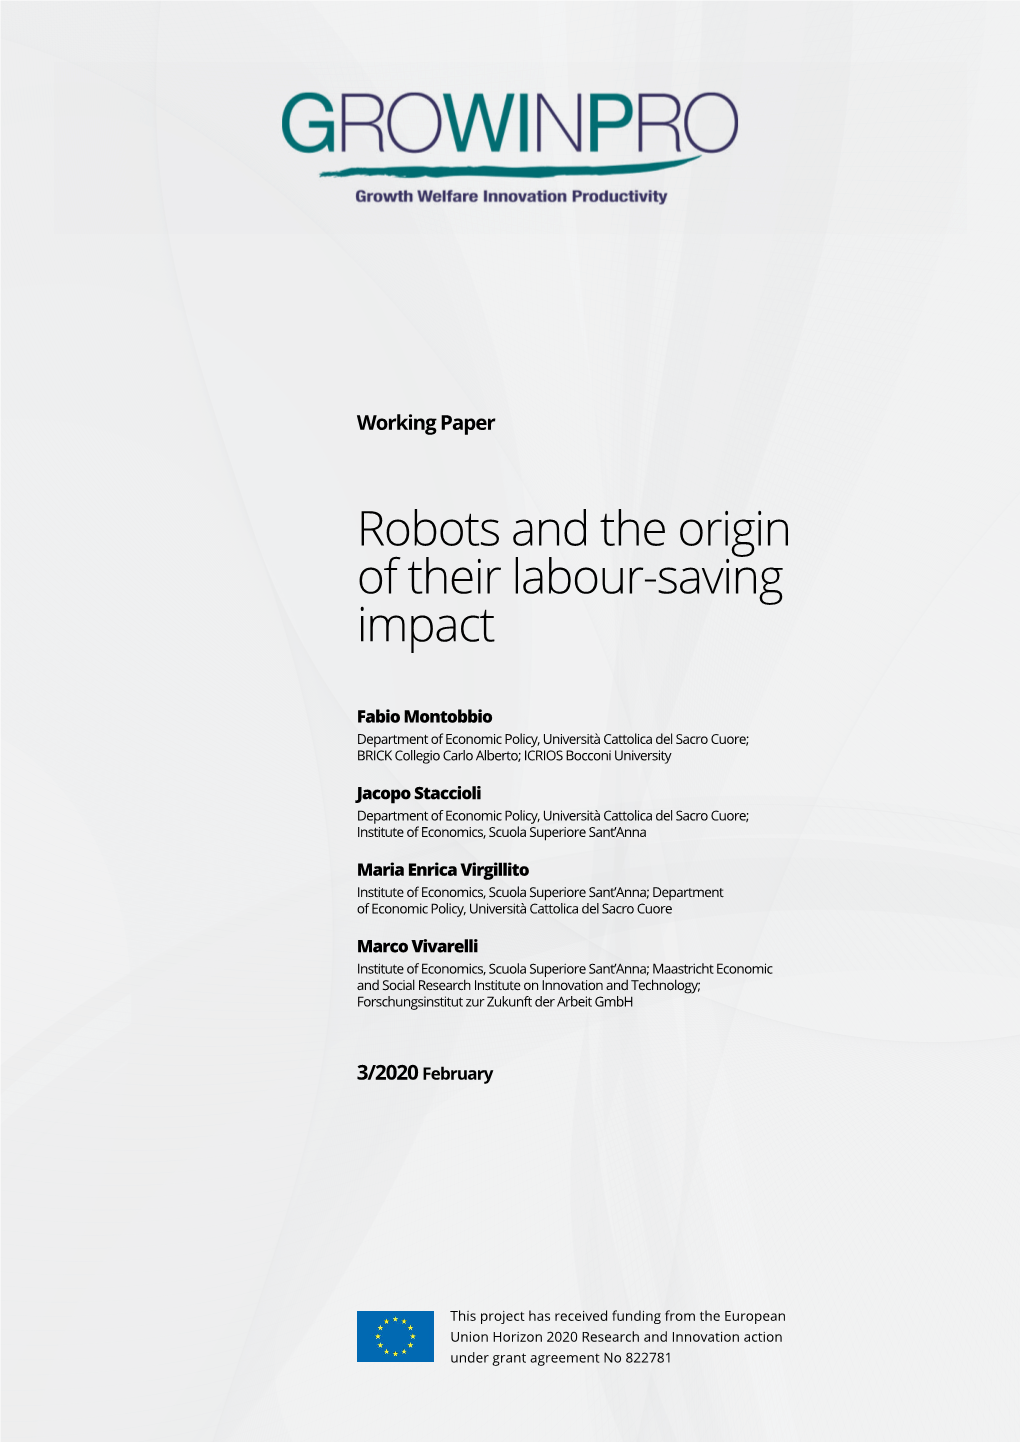 Robots and the Origin of Their Labour-Saving Impact